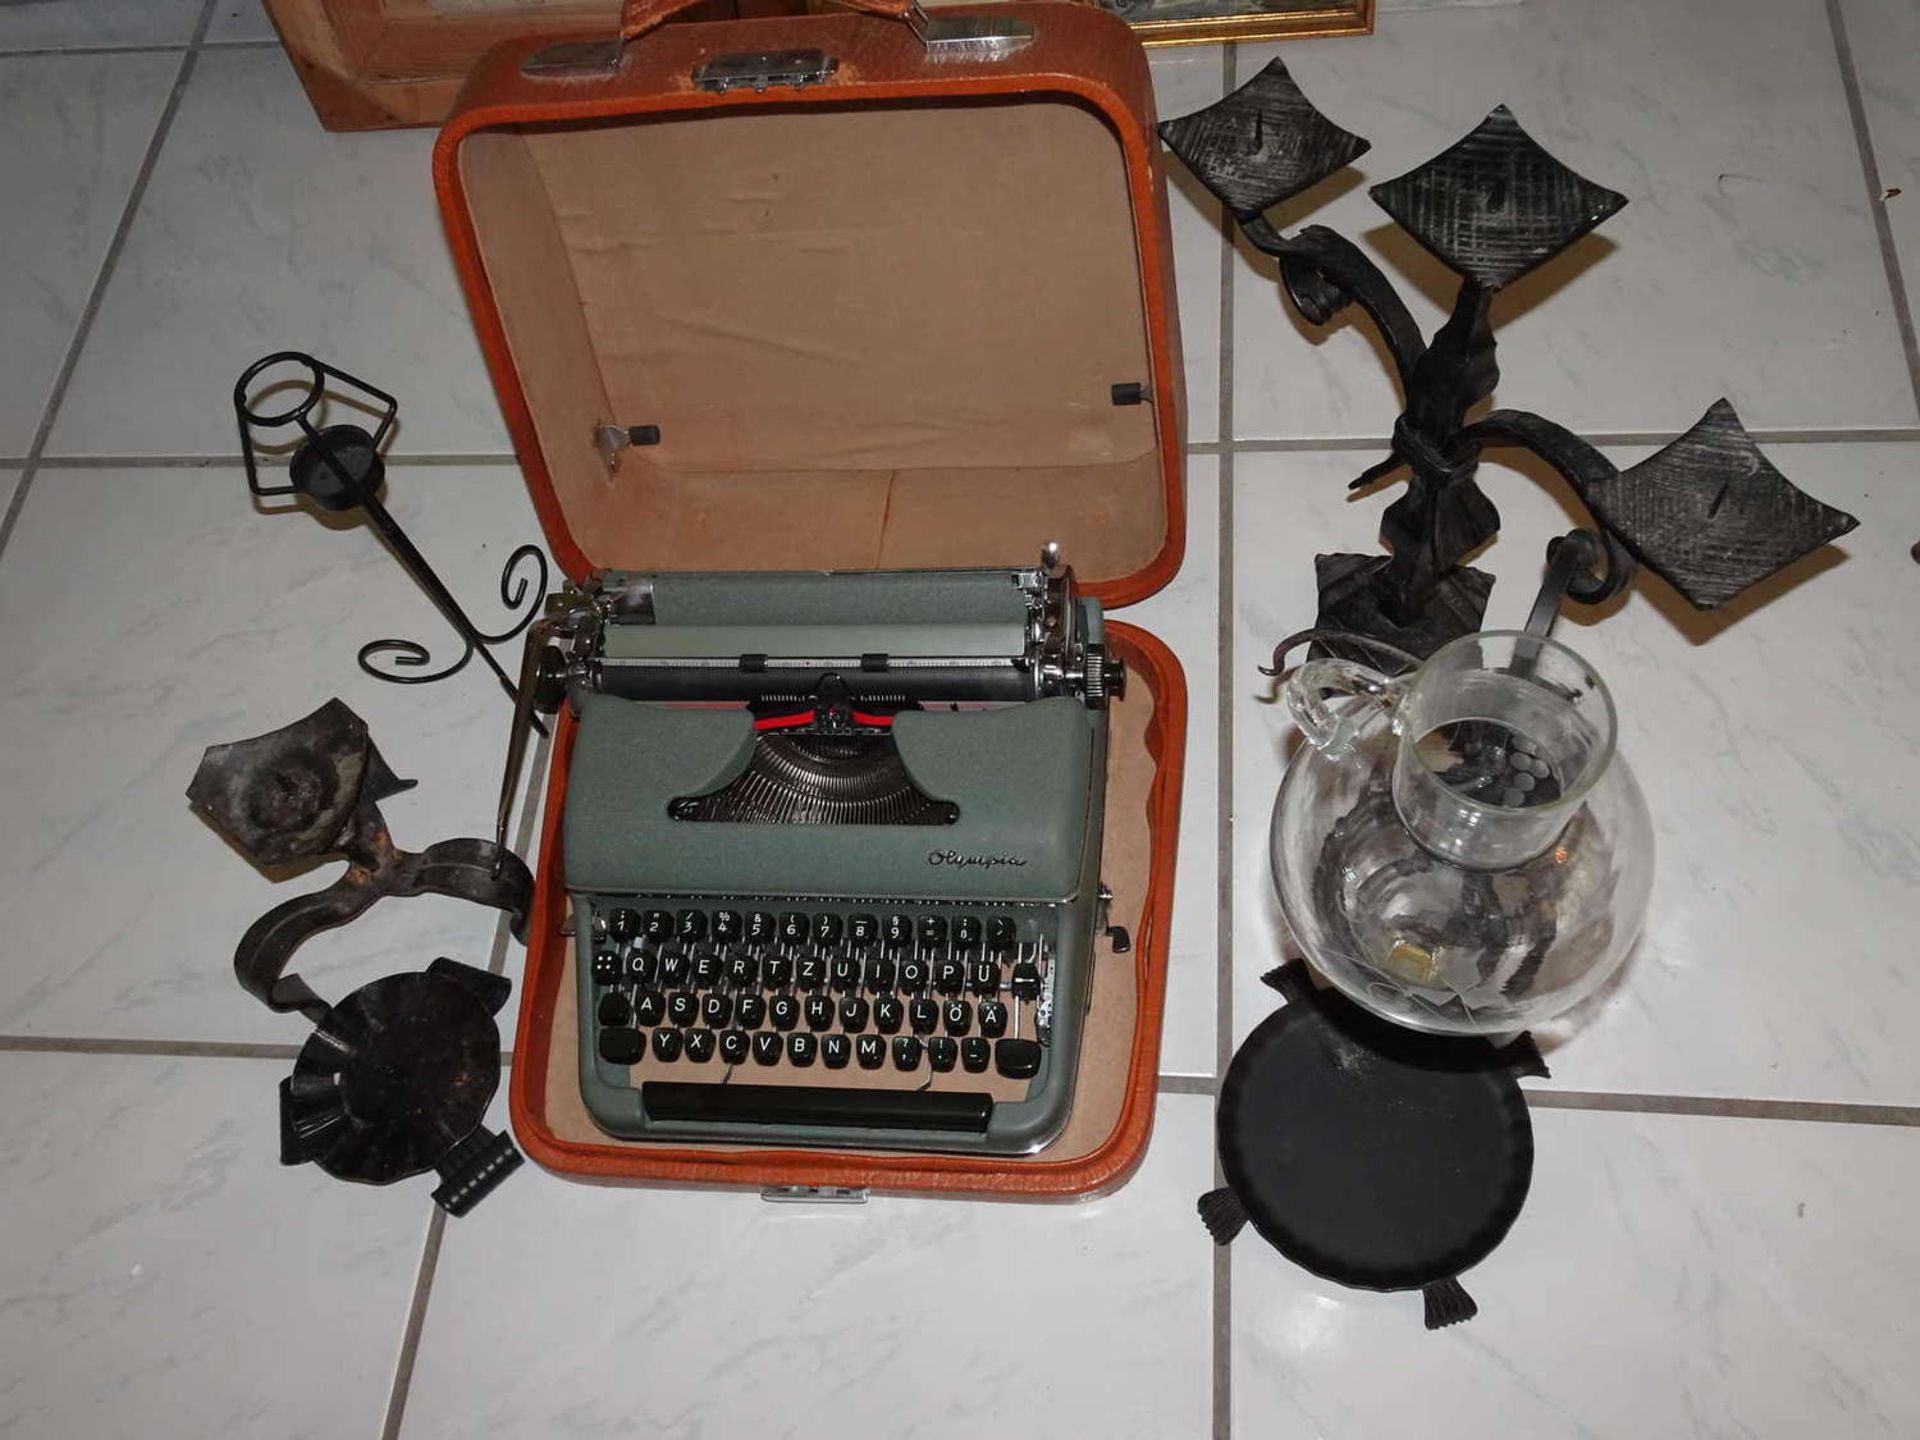 Lot of clearing goods, including 1 typewriter Olympia in a case, 1960s, and several parts of wrought